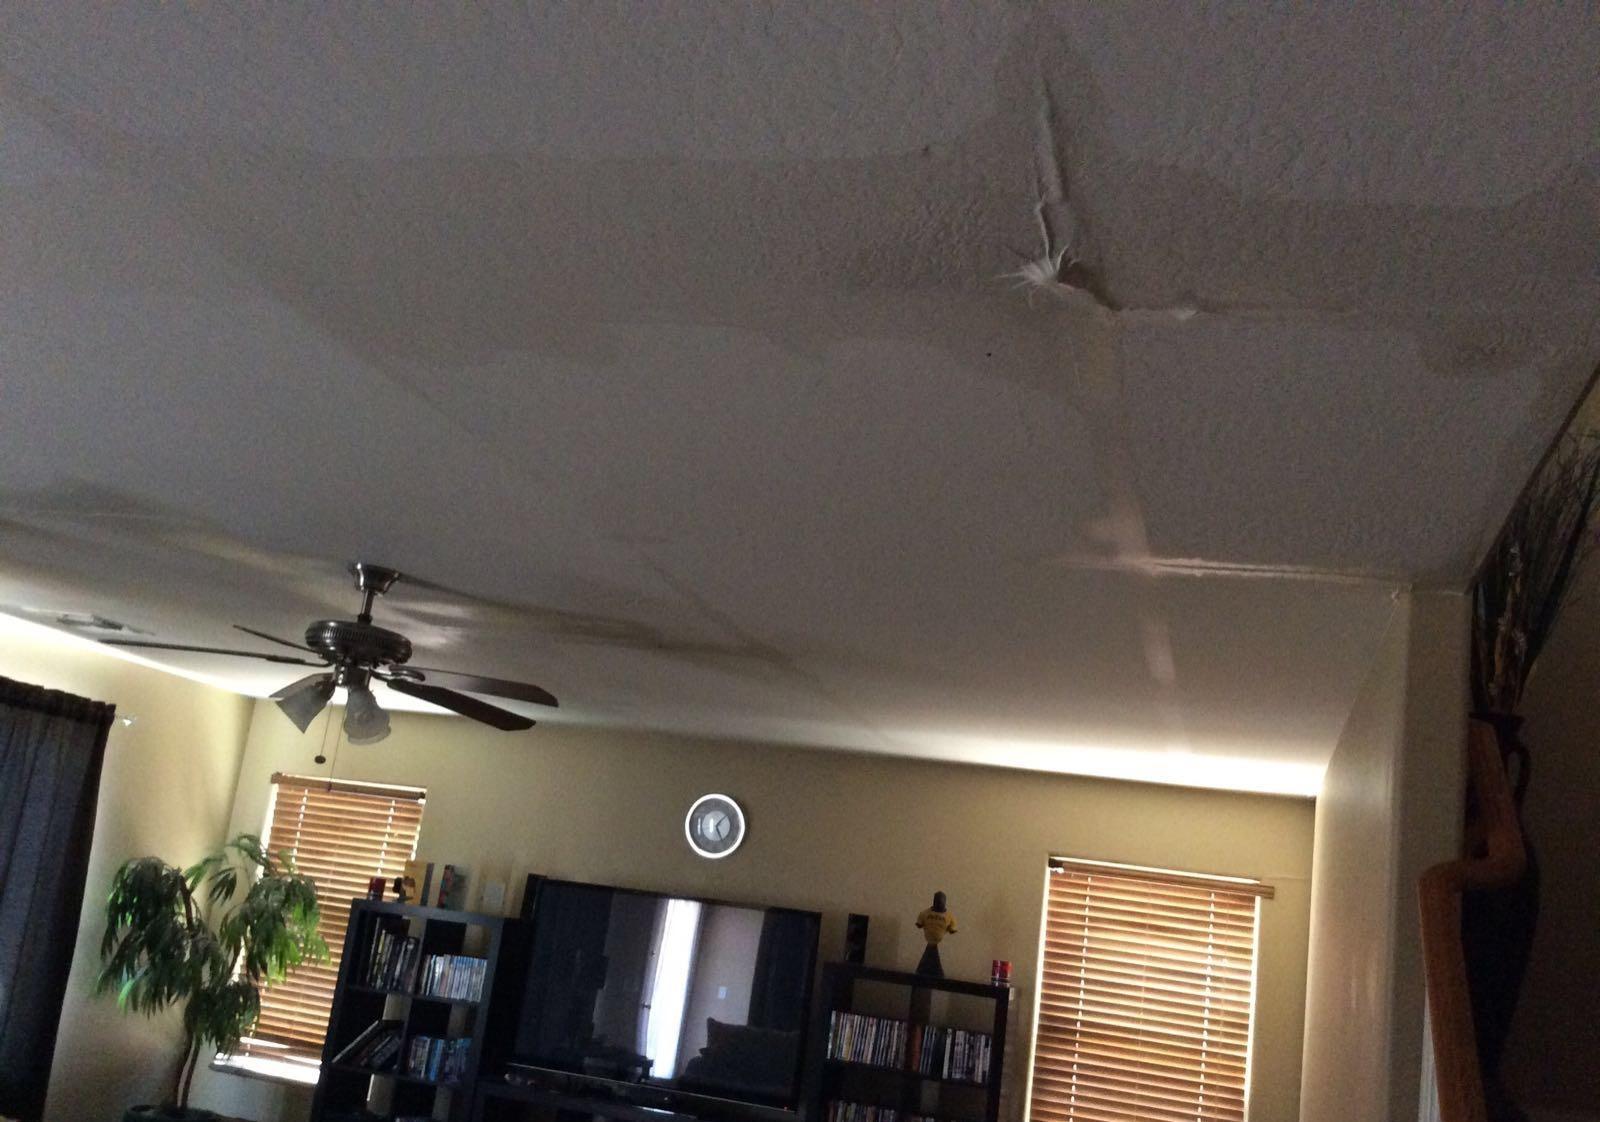 Leaky pipes in your ceiling can lead to major water damage in your Glendale home. Call SERVPRO of Peoria/W. Glendale for water mitigation.